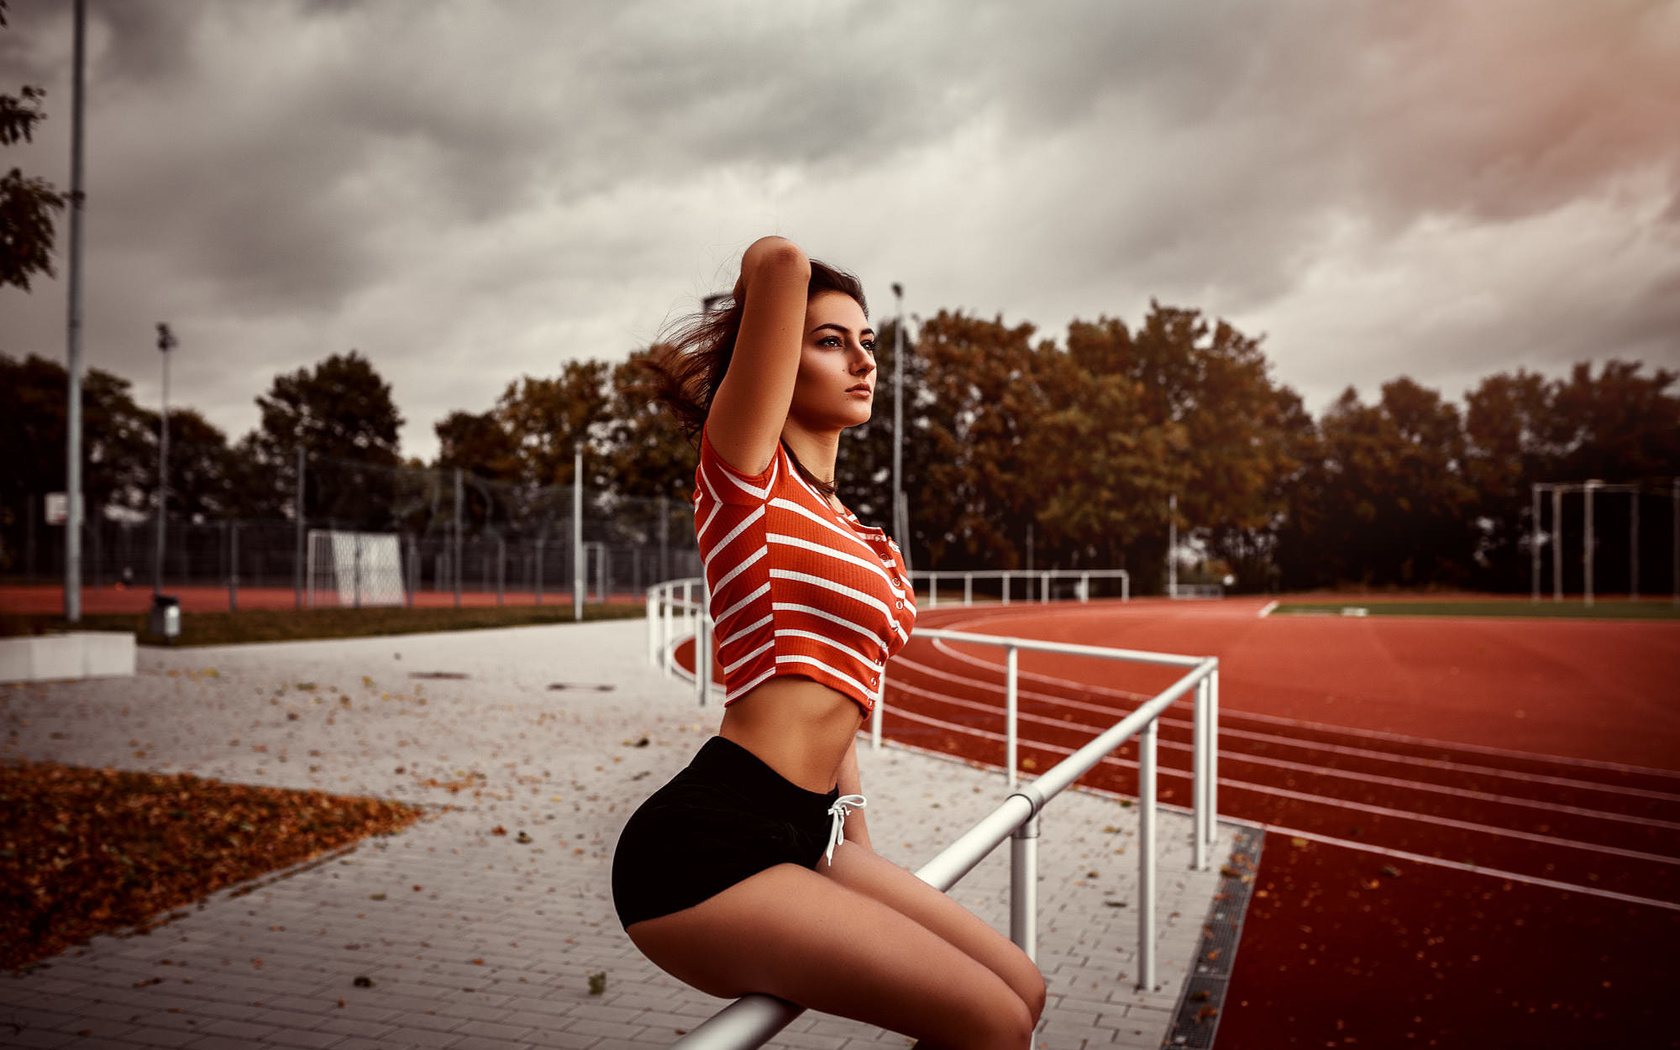 women, sitting, high waisted short, ass, trees, women outdoors, crop top, looking away, leaves, fence, belly, clouds, sky